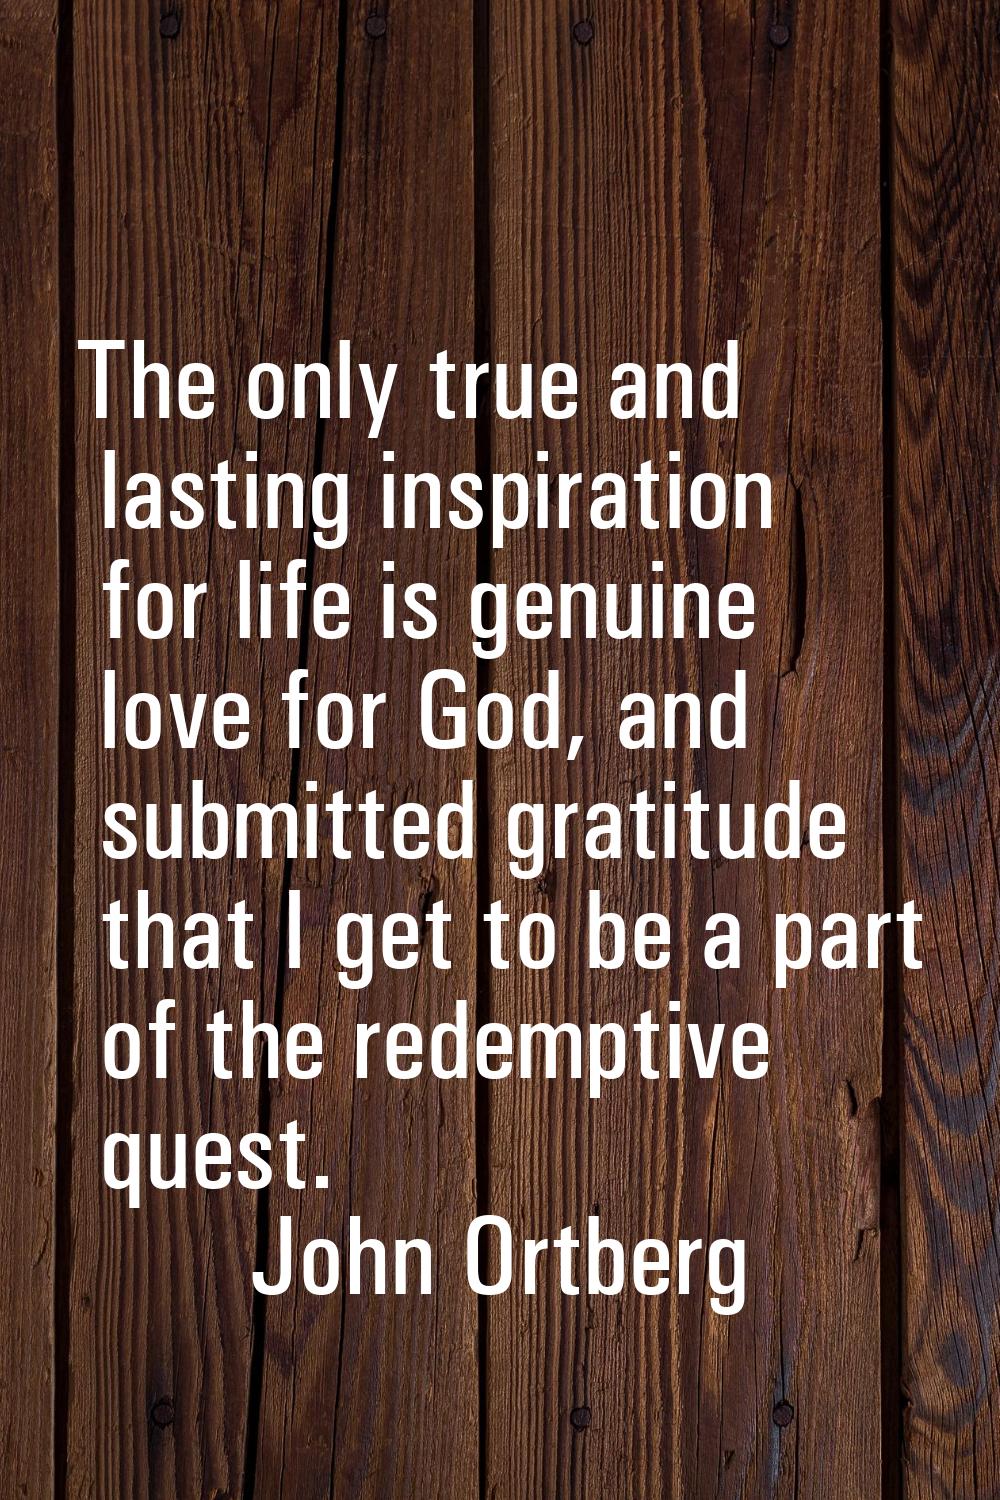 The only true and lasting inspiration for life is genuine love for God, and submitted gratitude tha